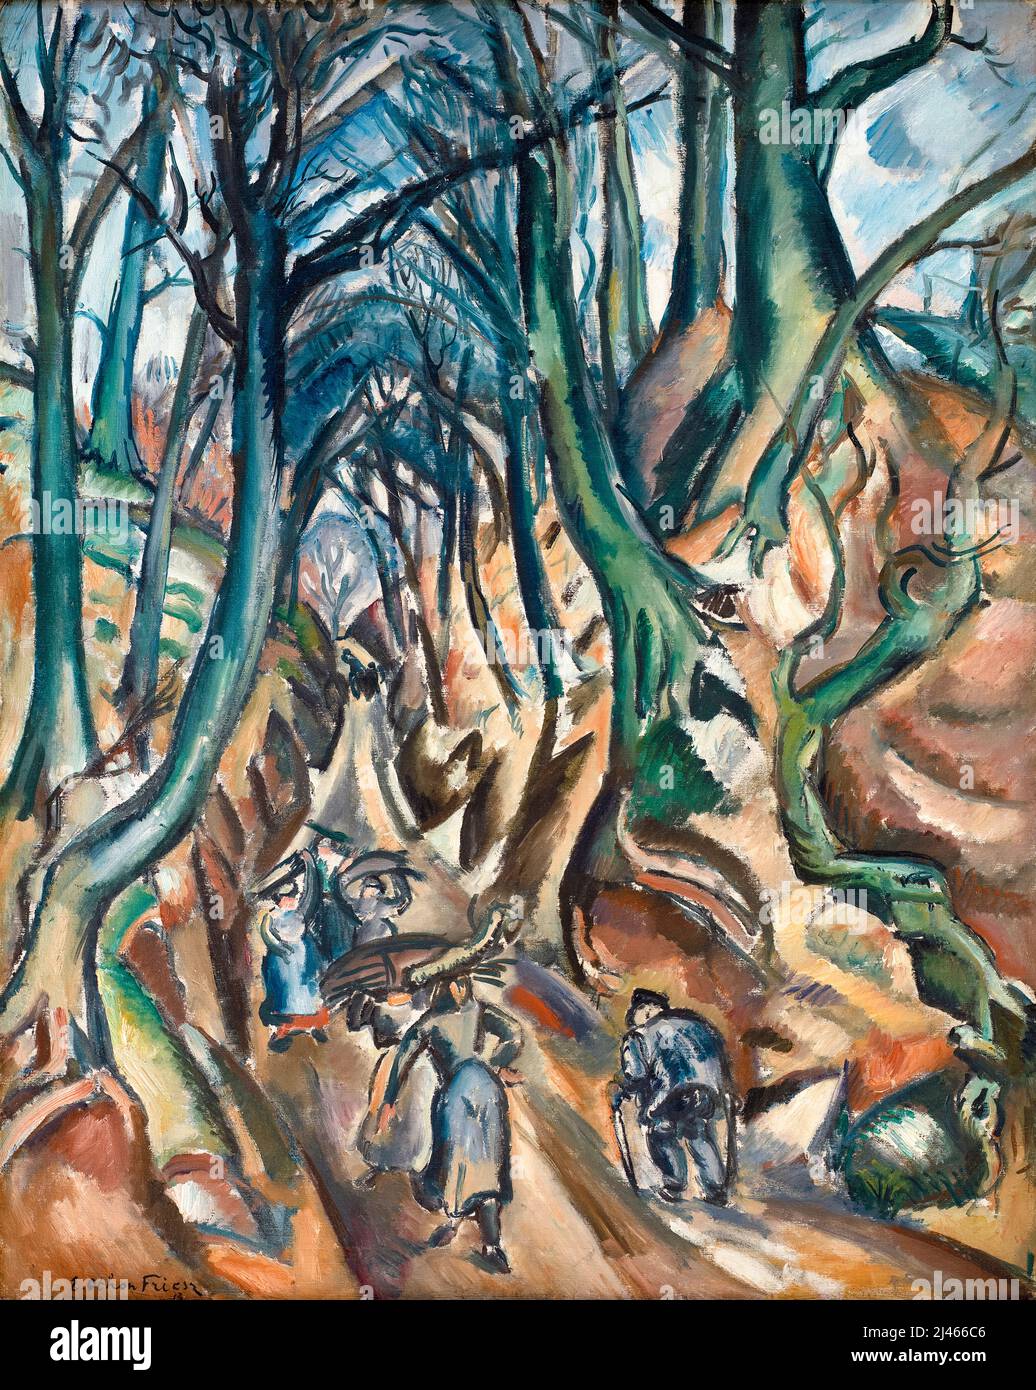 Othon Friesz, The Sunken Road in Winter, painting in oil on canvas, 1913 Stock Photo